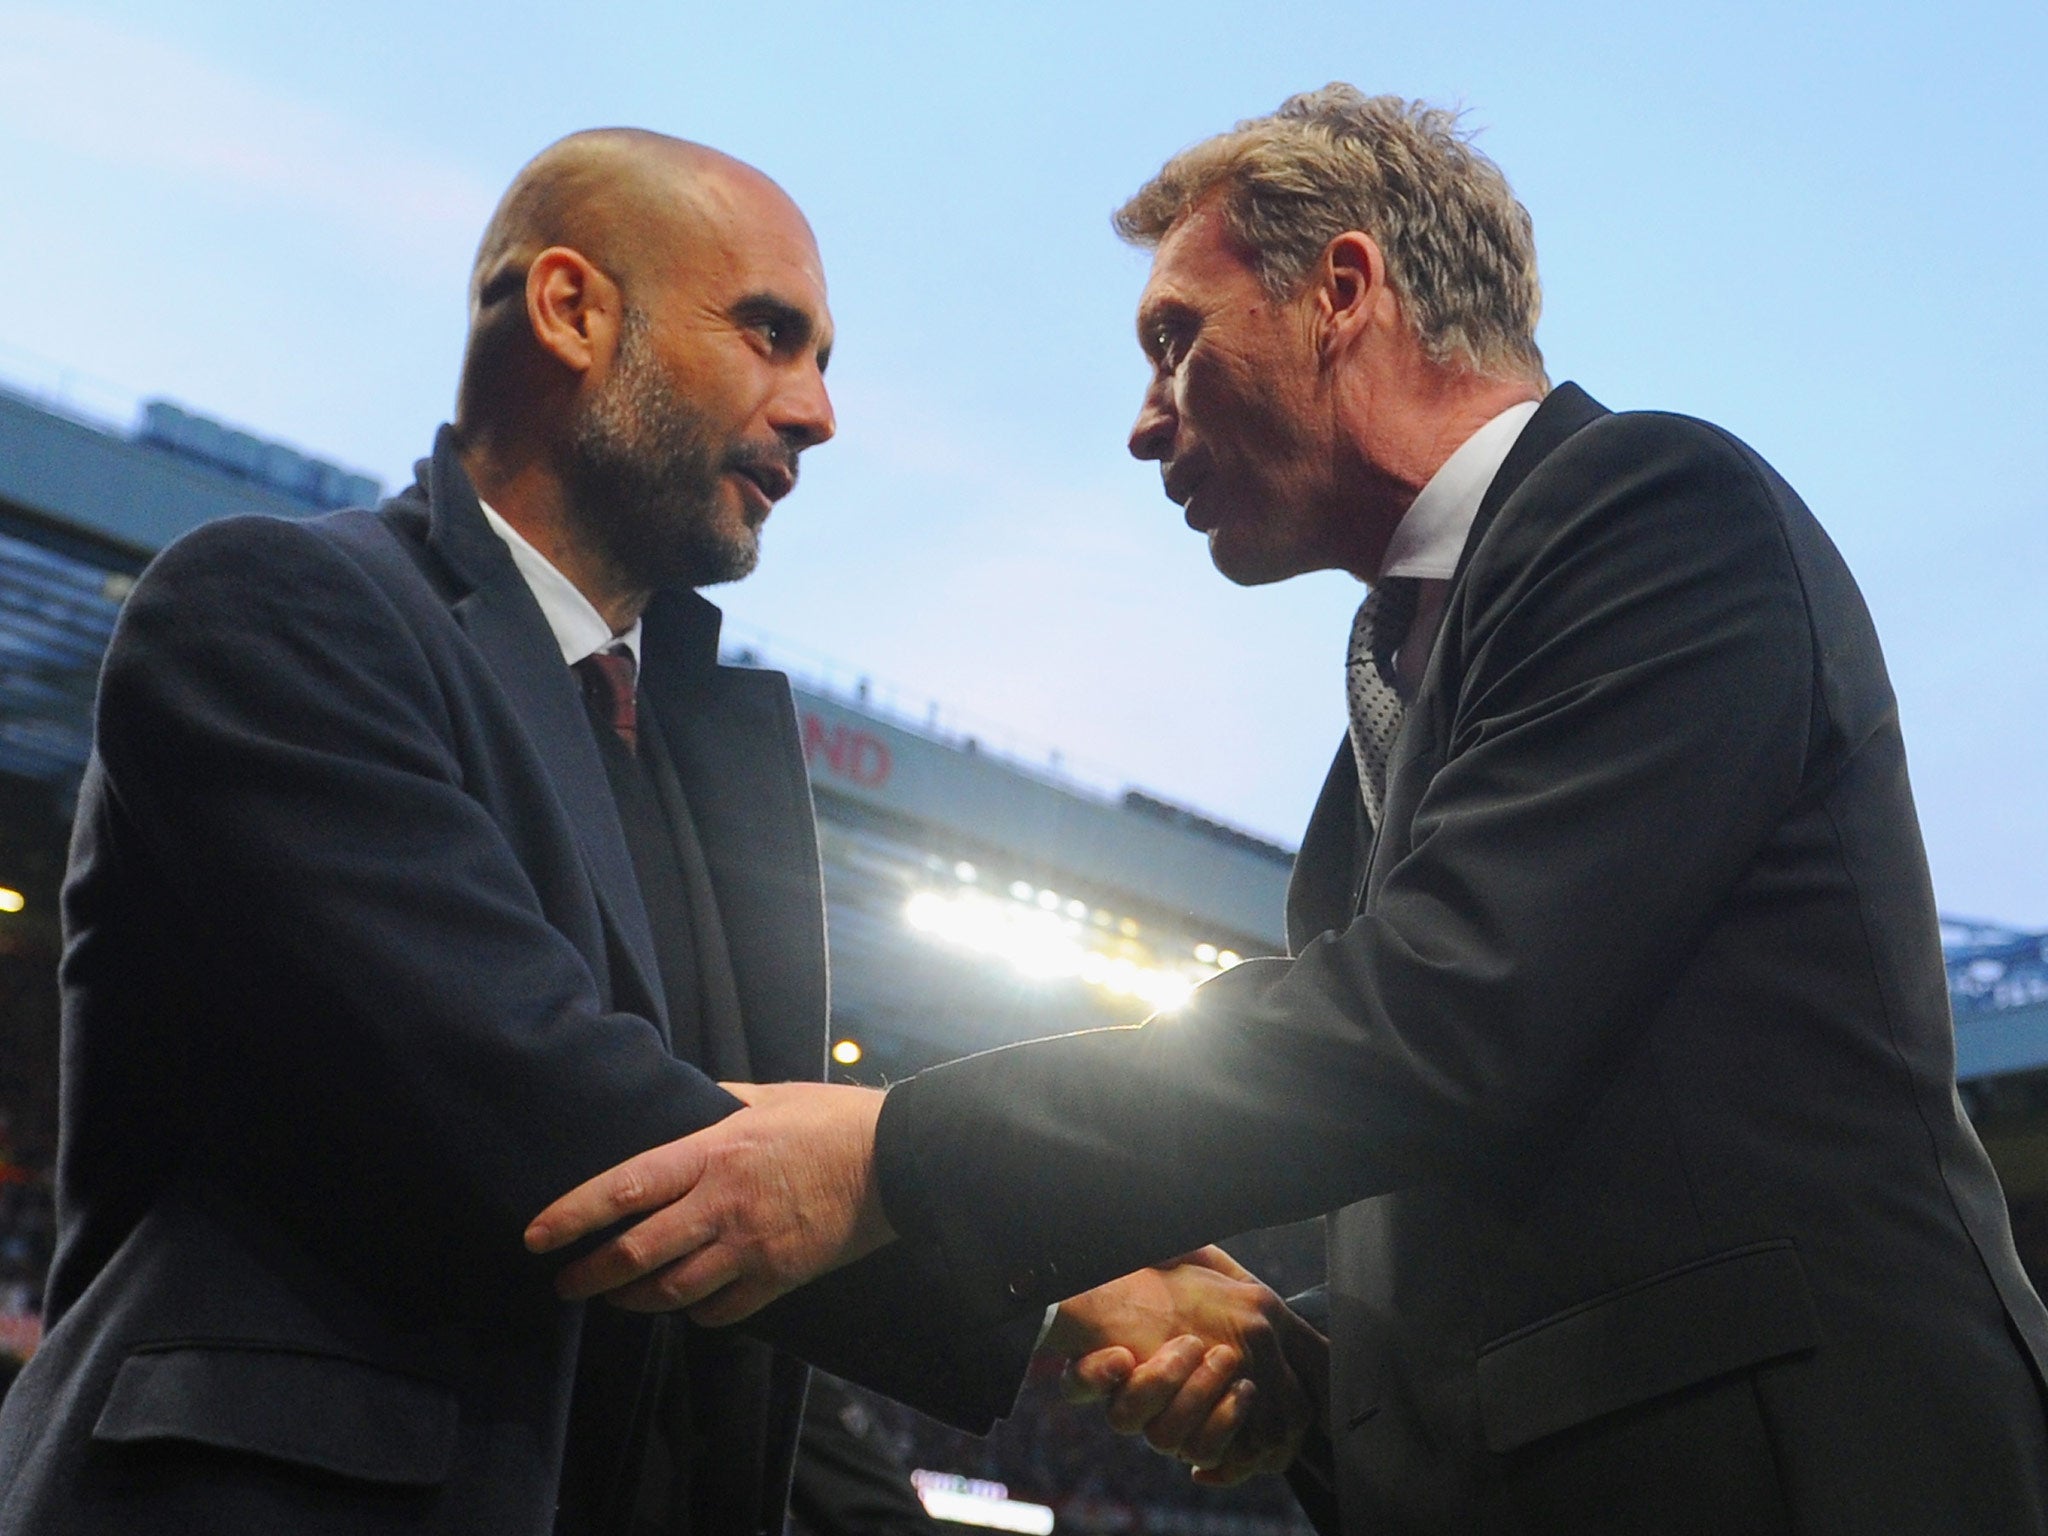 David Moyes and Pep Guardiola pictured together in the first-leg of Manchester United v Bayern Munich